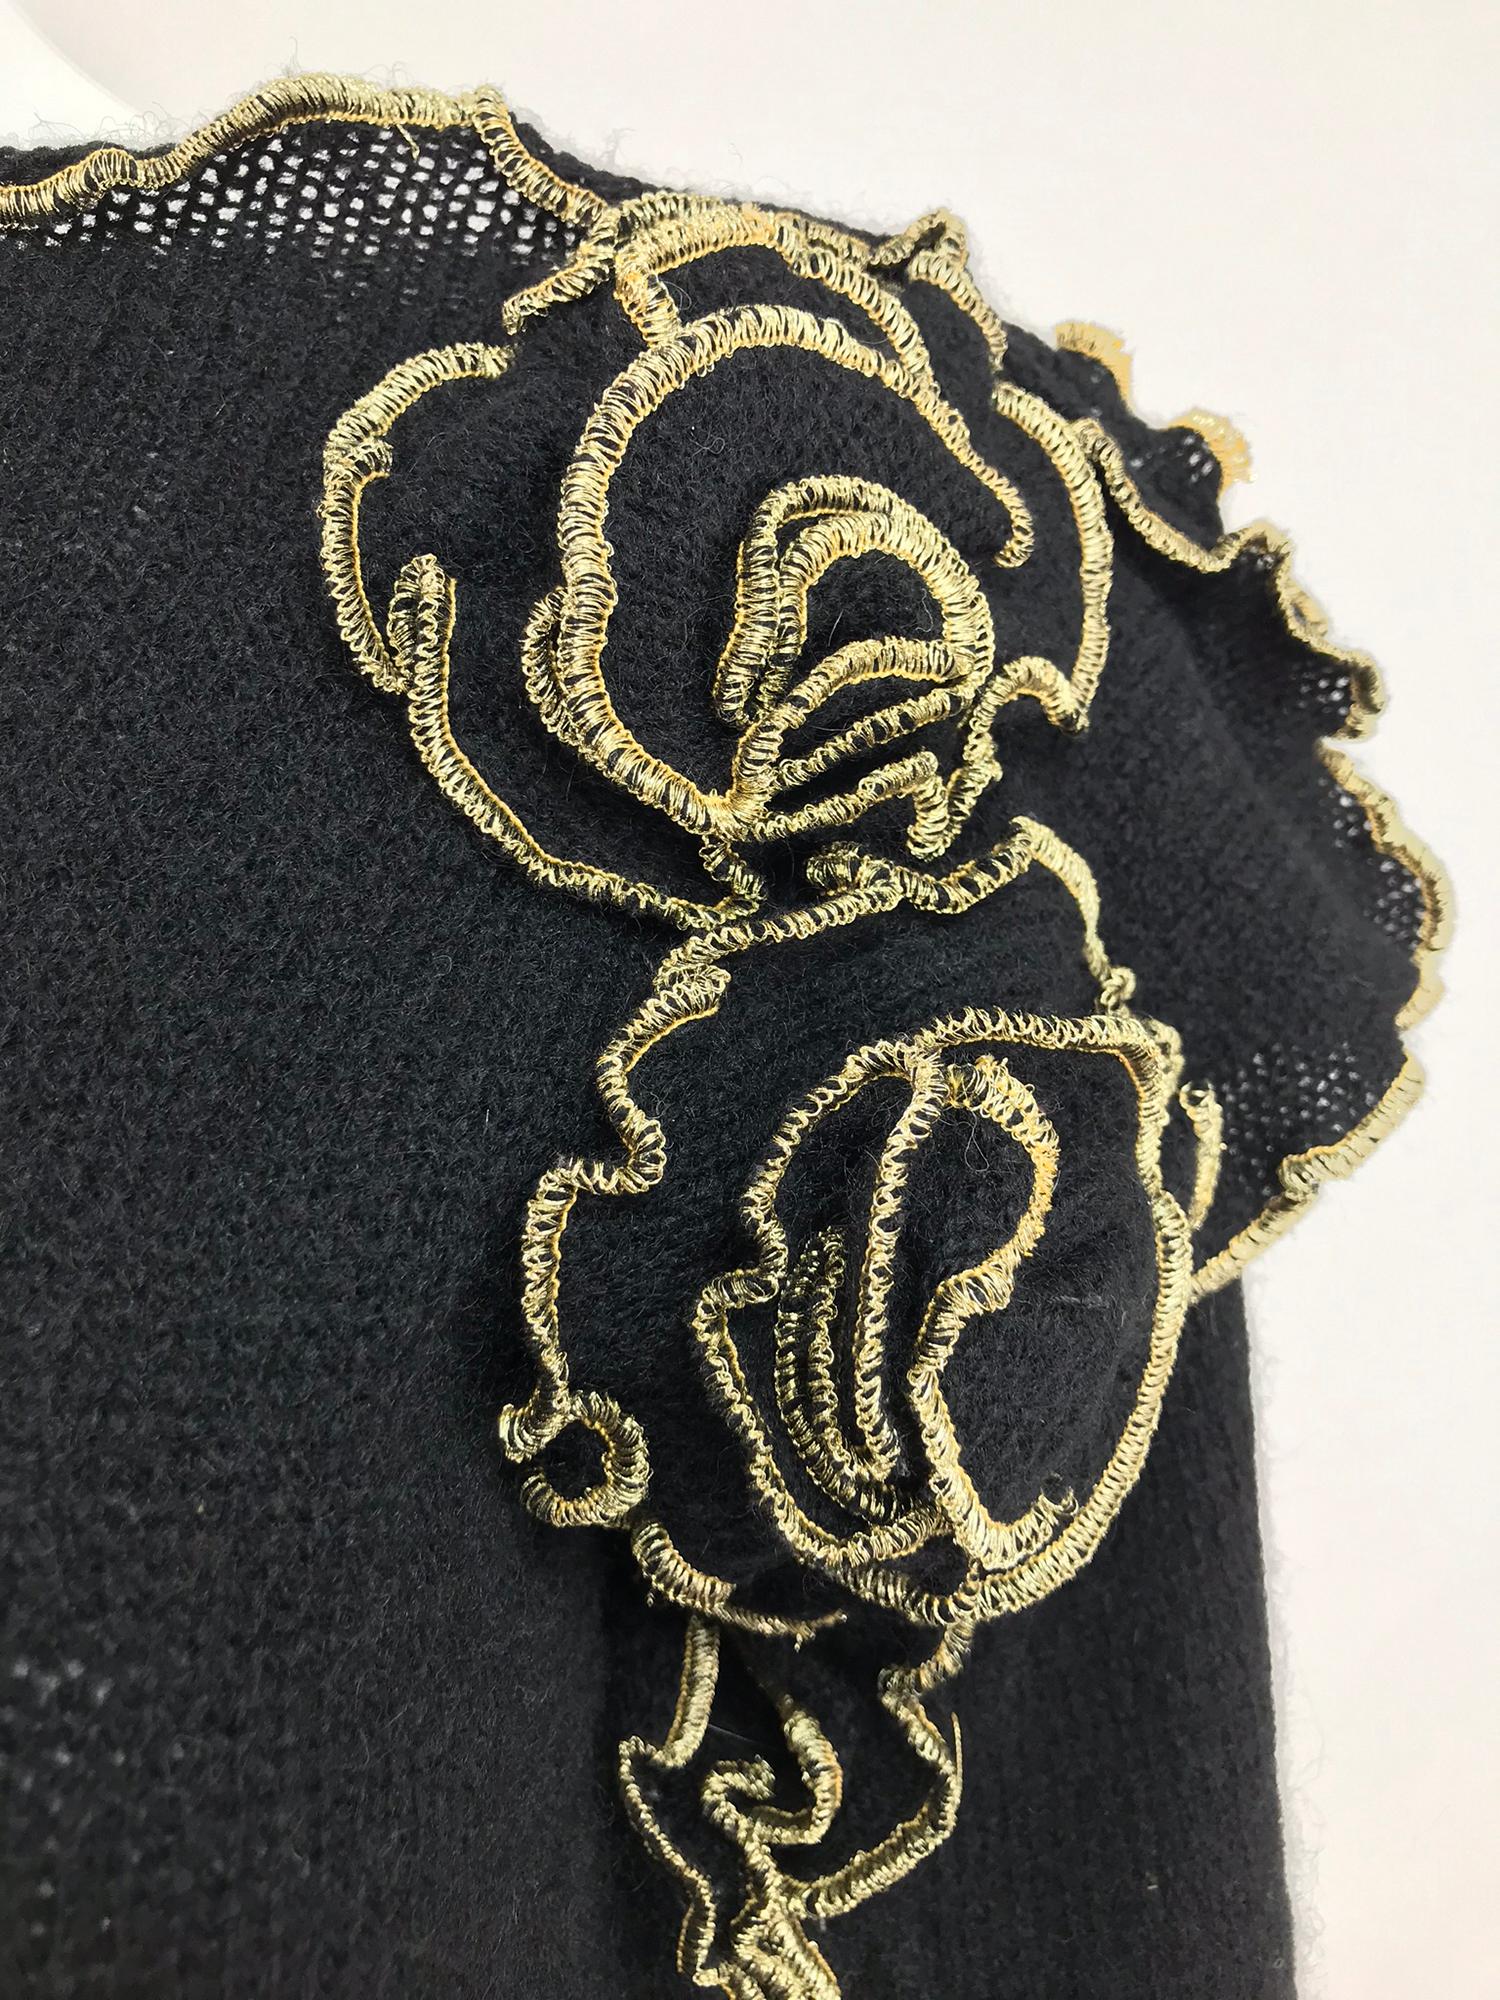 Leigh Westbrook Black Knit Gold Trim Floral Applique Sweater from the 1980s. Leigh Westbrook was located in New York City in the early 1980s and specialized in knits, sweaters, coats and capes with signature coloured serged edgings, and three